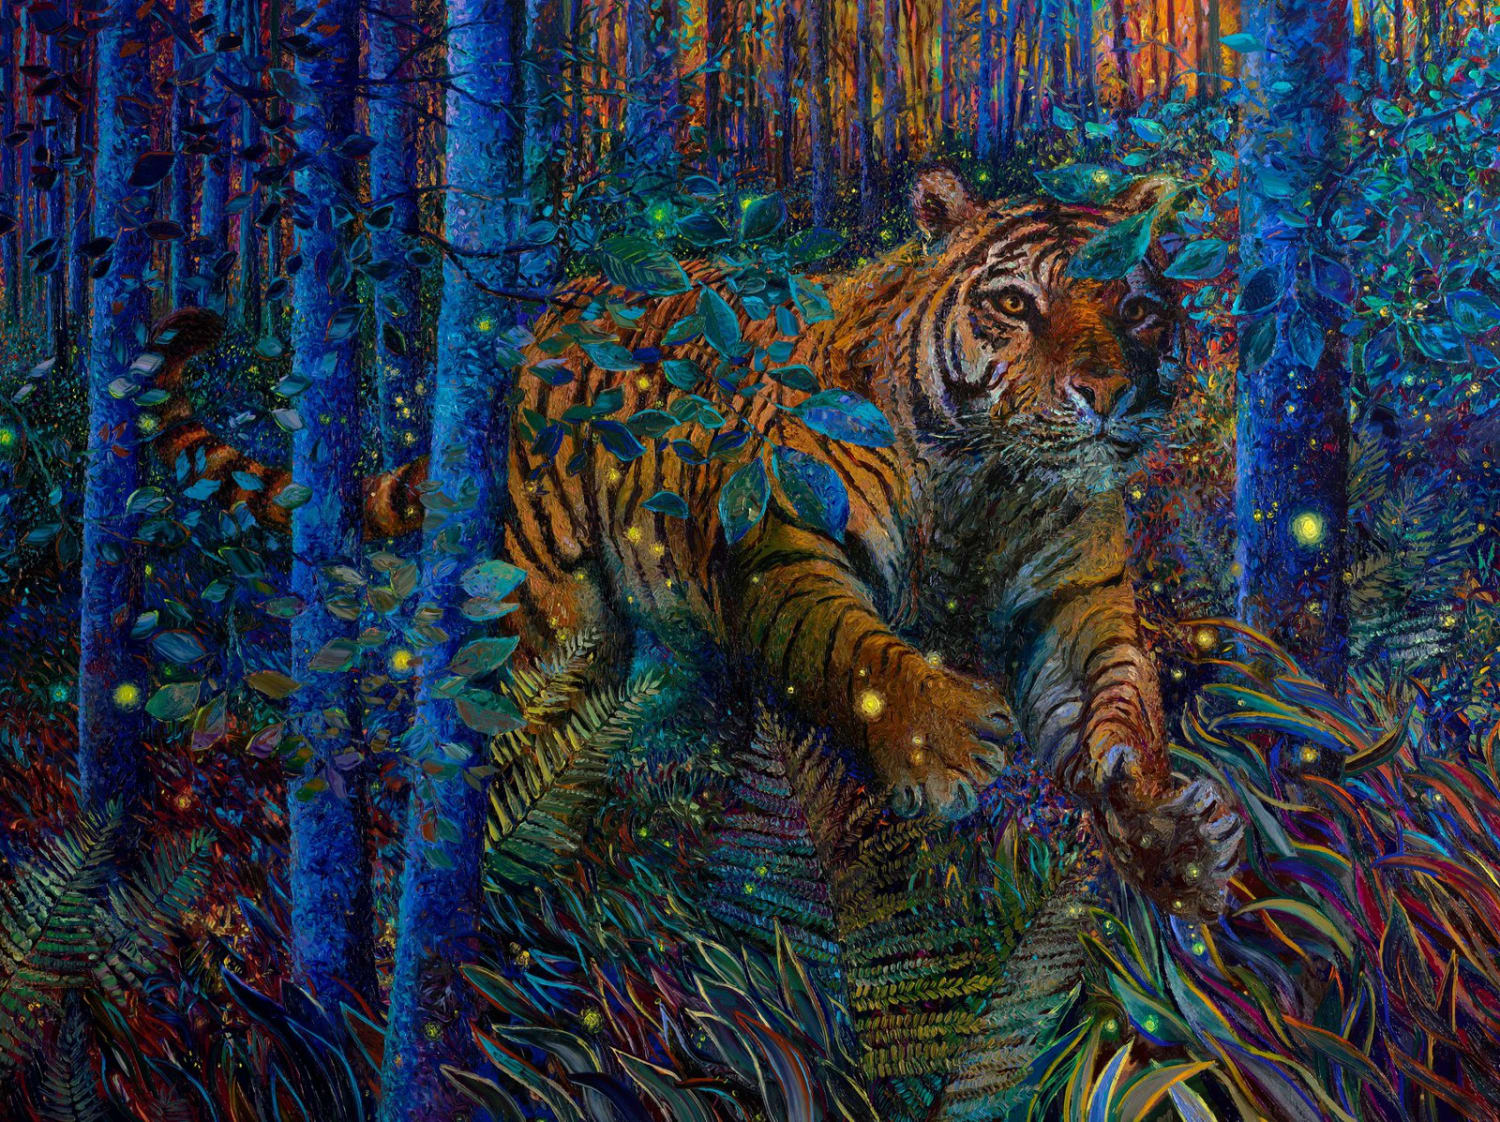 Iris Scott, the World's First Professional Finger-Painter, Launches NYC Show